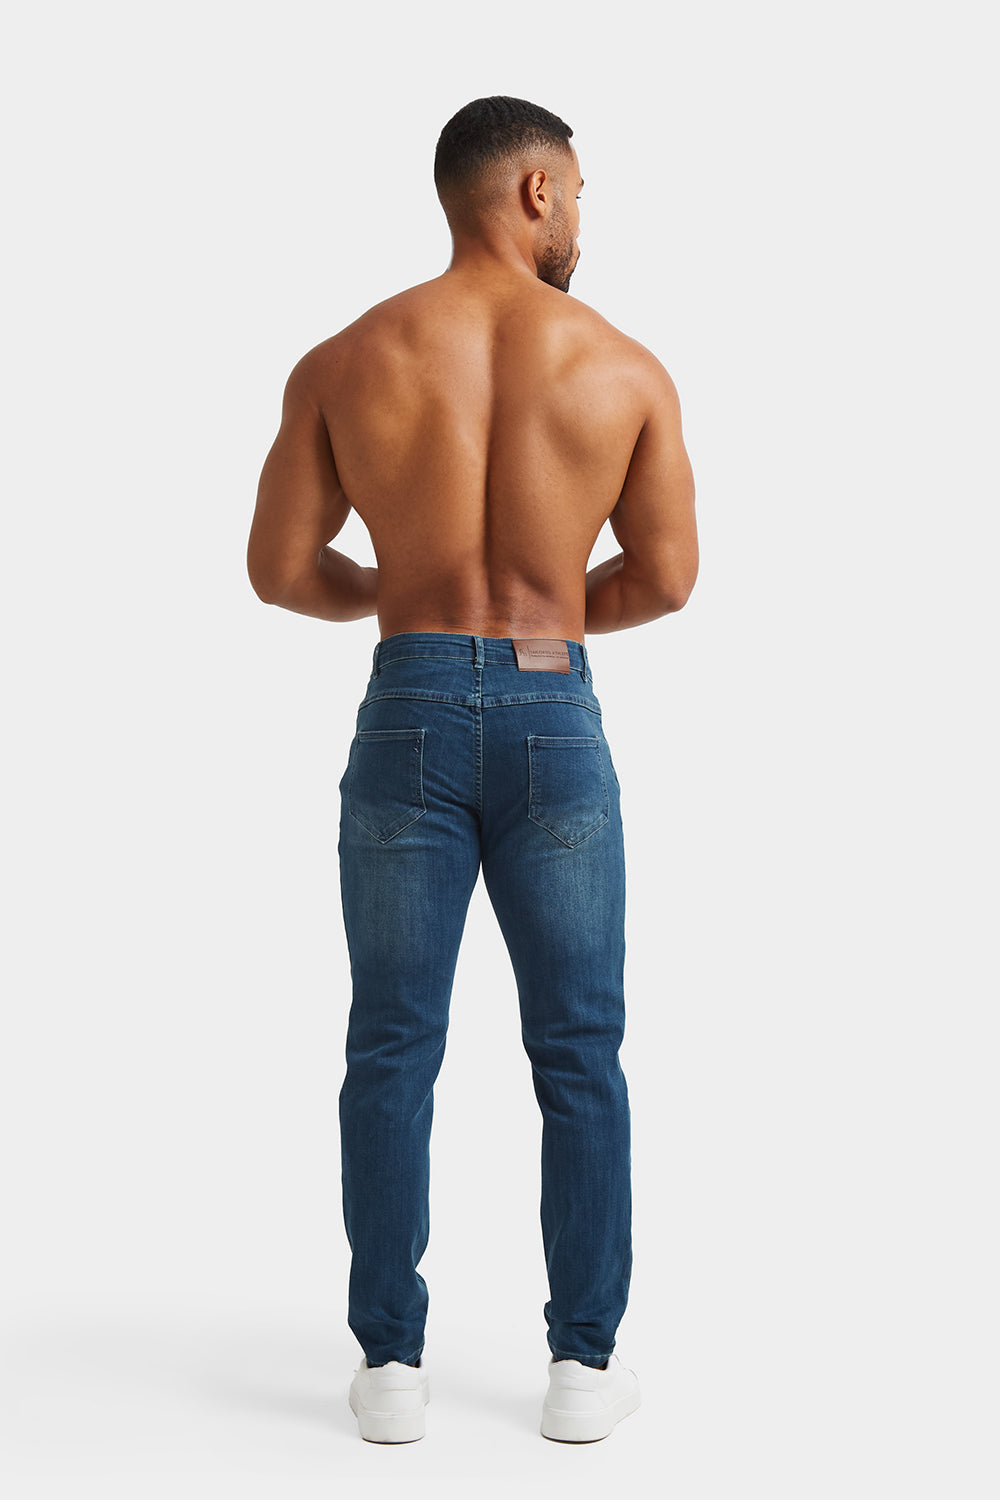 Muscle Fit Hyper Stretch Jeans  Built for Athletes that Perform– Fitizen